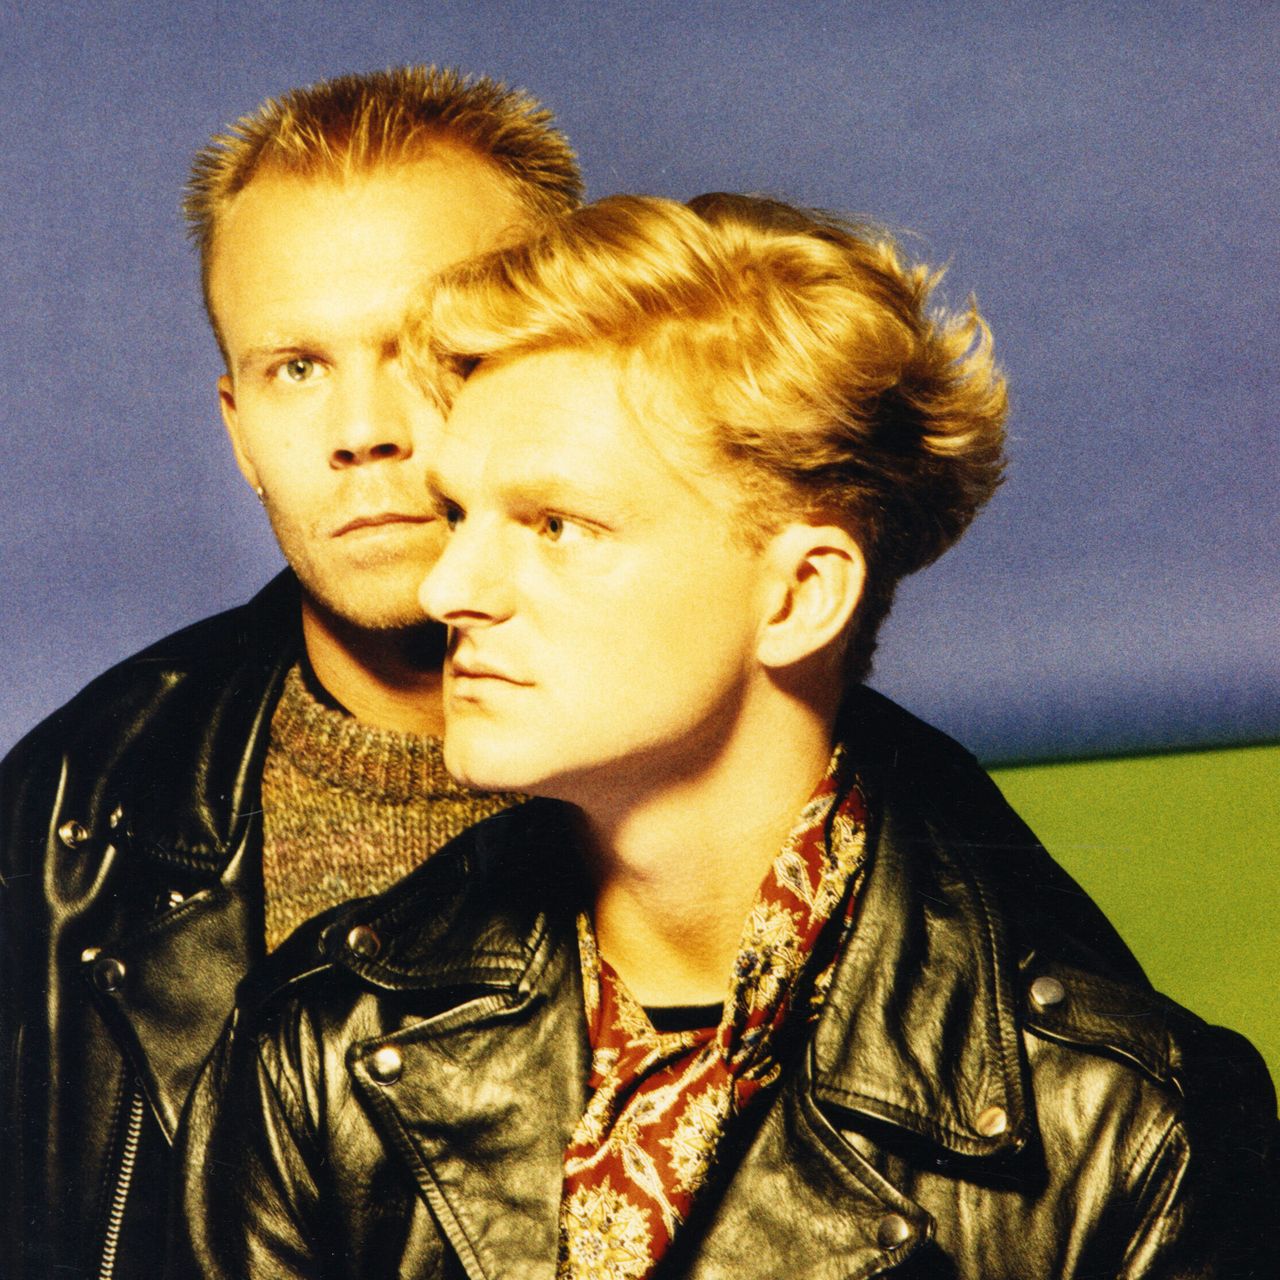 Andy Bell with bandmate Vince Clarke at the height of their Erasure fame